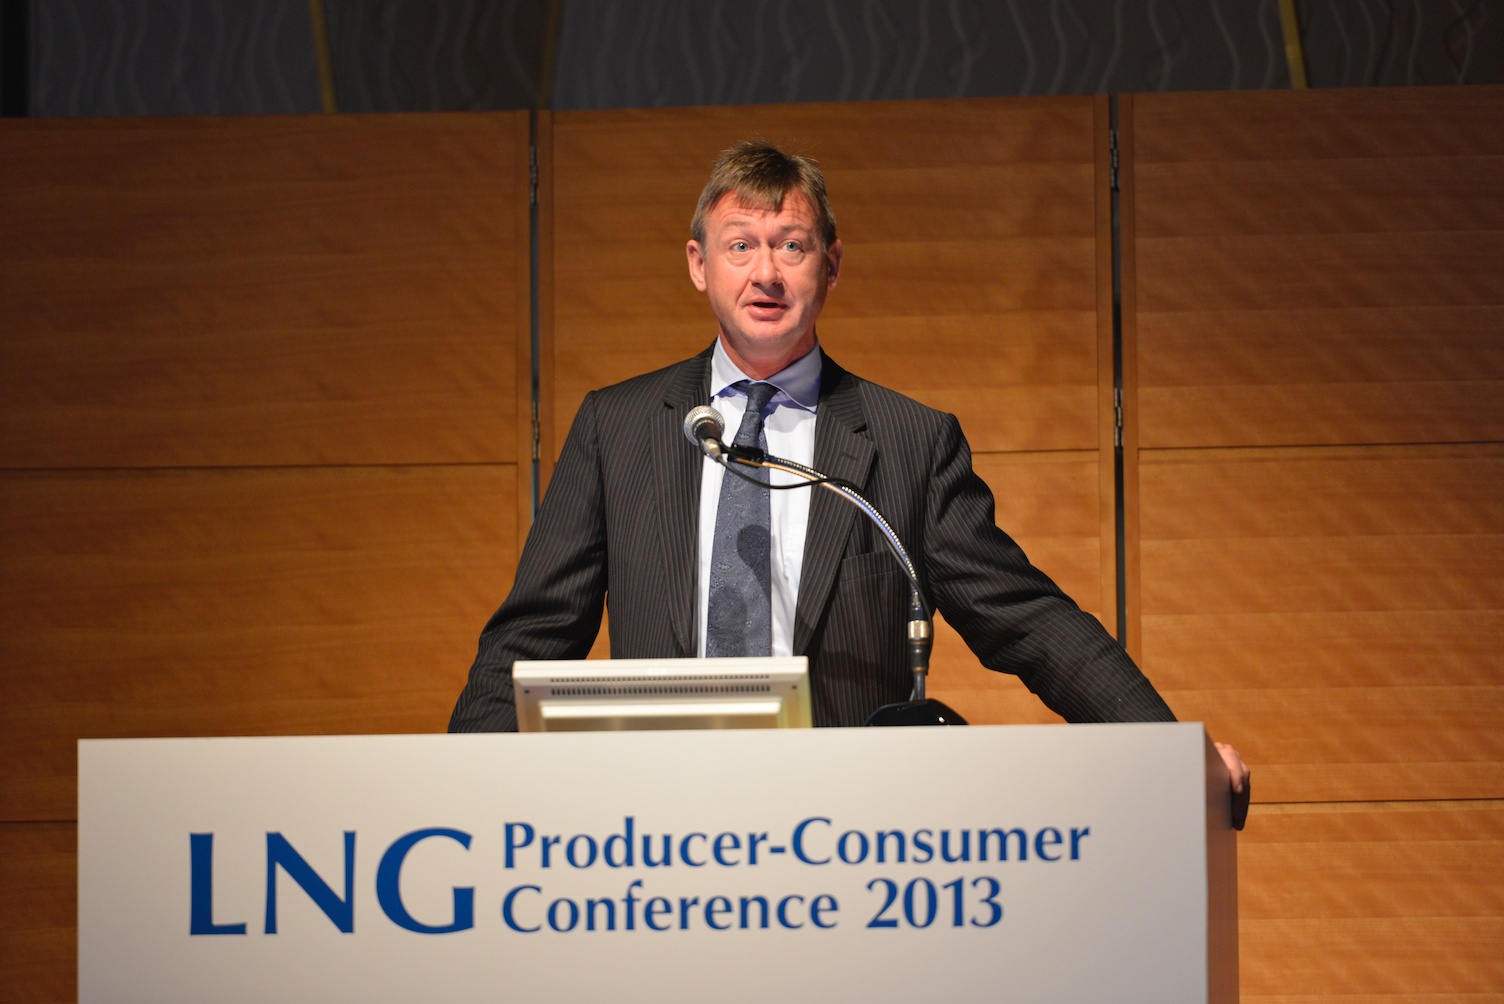 LNG Producer Consumer Conference 2013  (5)  09 10 2013